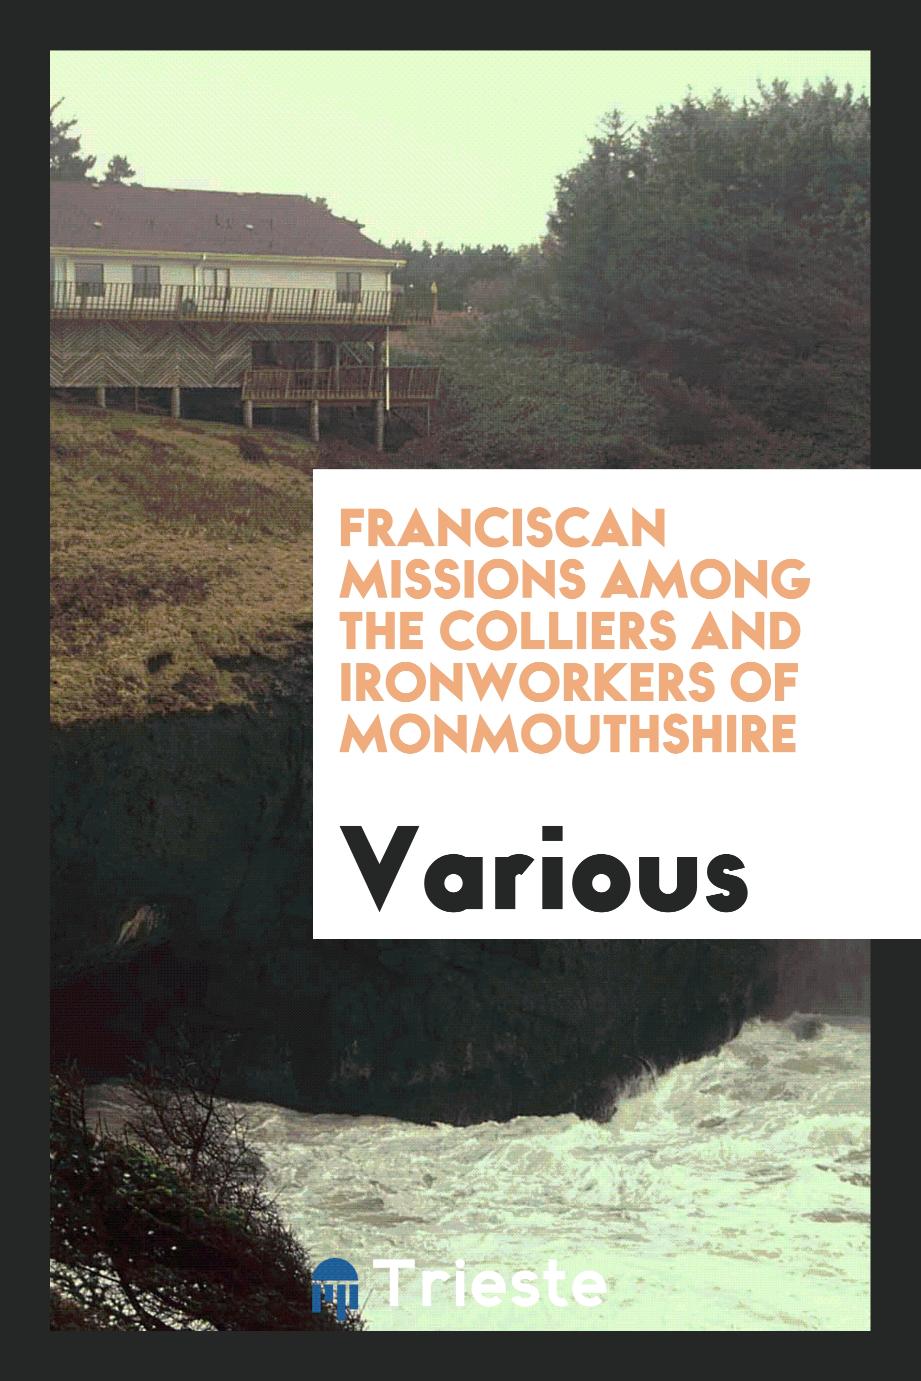 Franciscan Missions Among the Colliers and Ironworkers of Monmouthshire